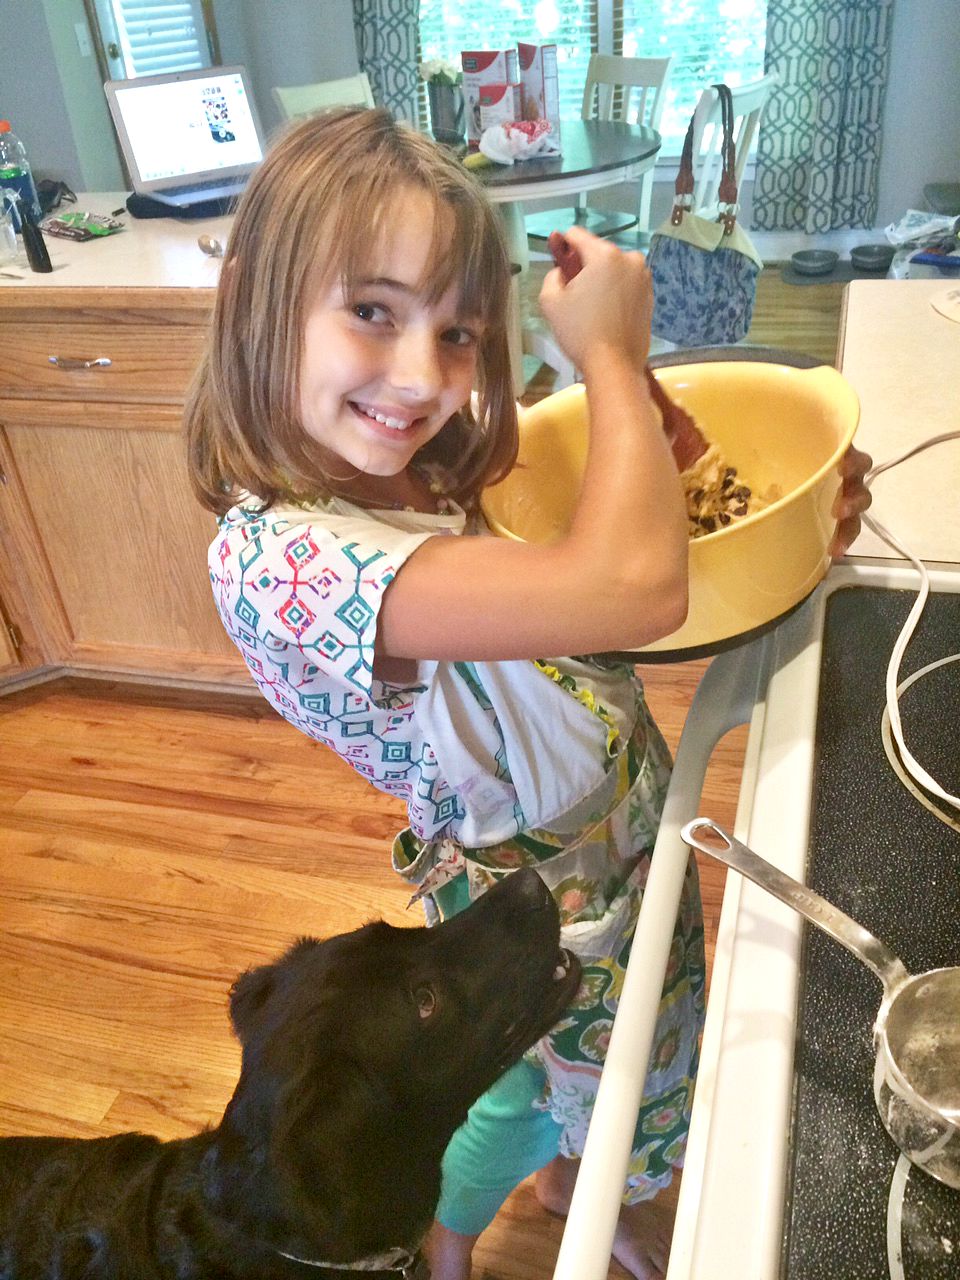 Friday Baking With Elsie